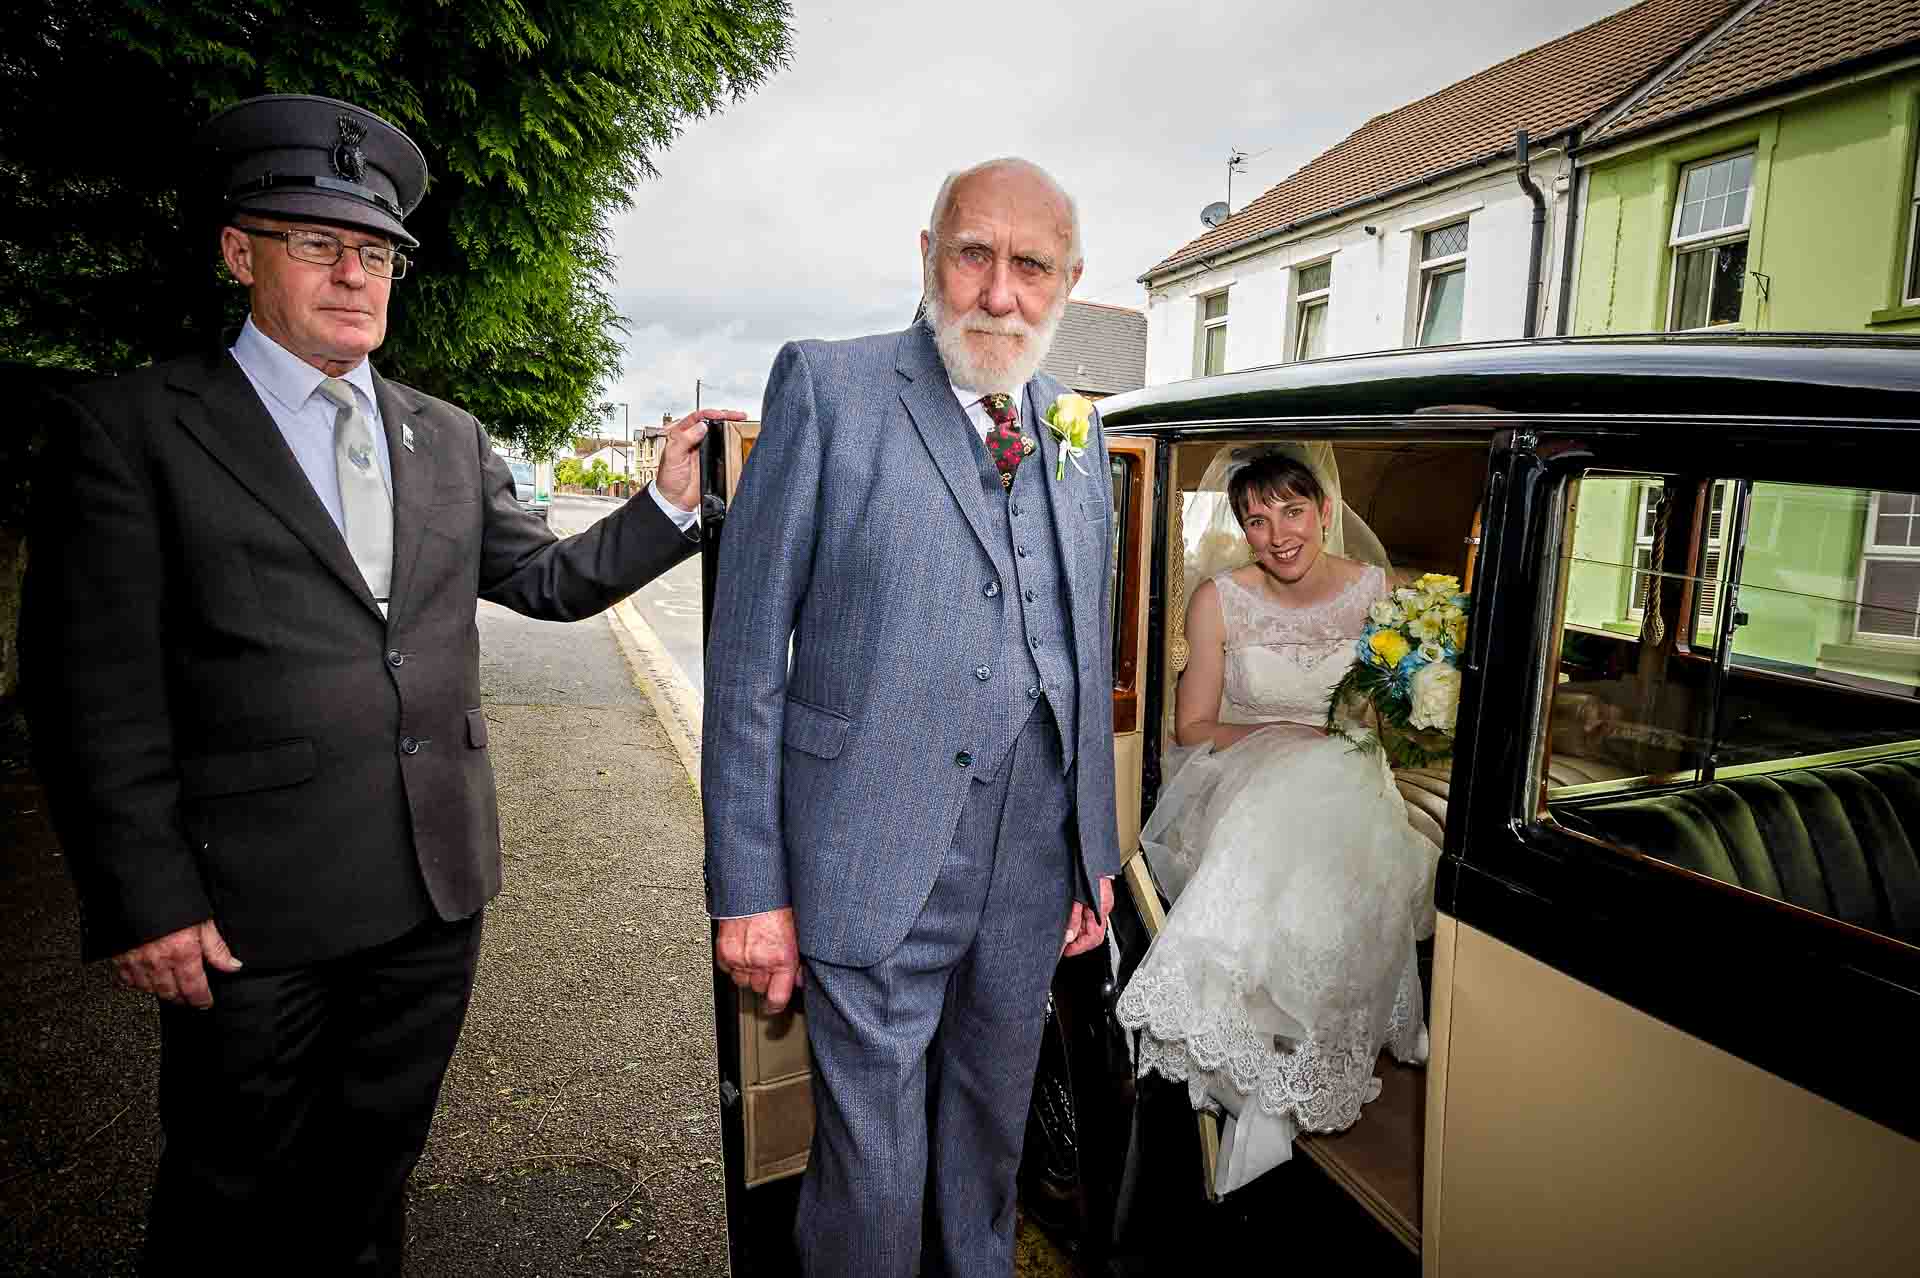 Grandfather standing outside Rolls Royce with Chauffeur and bride seated